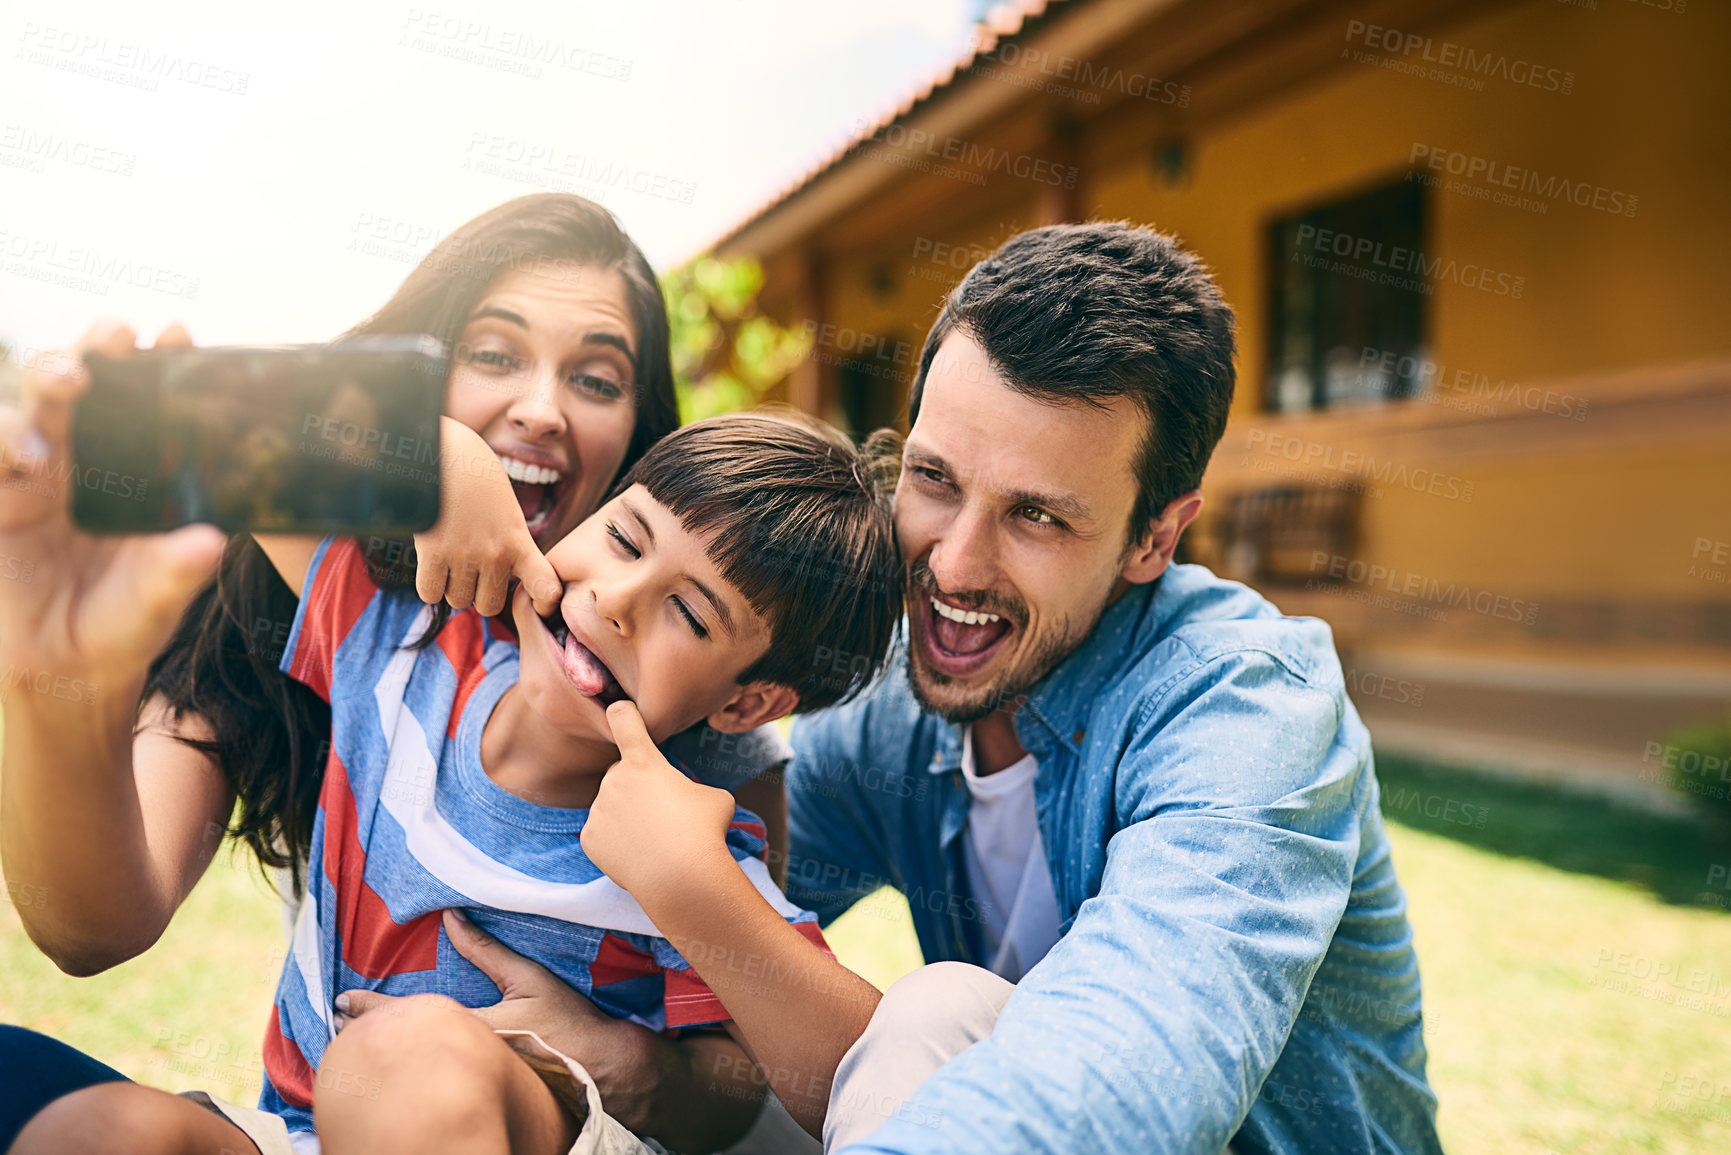 Buy stock photo Happy family, smile and silly face for selfie, funny photo or profile picture in social media vlog outside home. Mother, father and child smiling with goofy facial expression for fun memory together